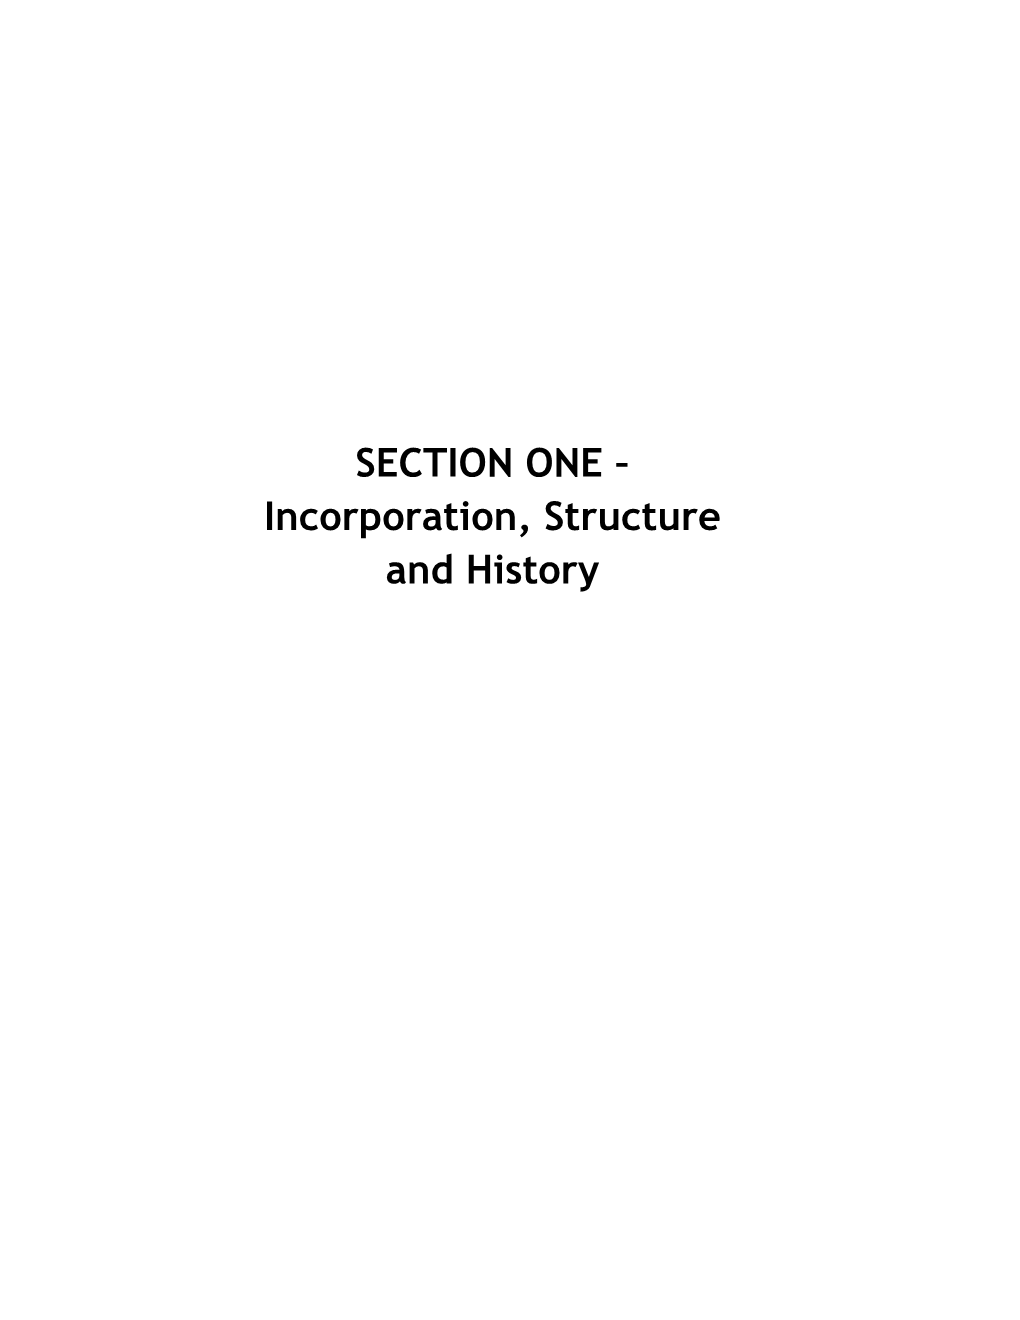 SECTION ONE – Incorporation, Structure and History